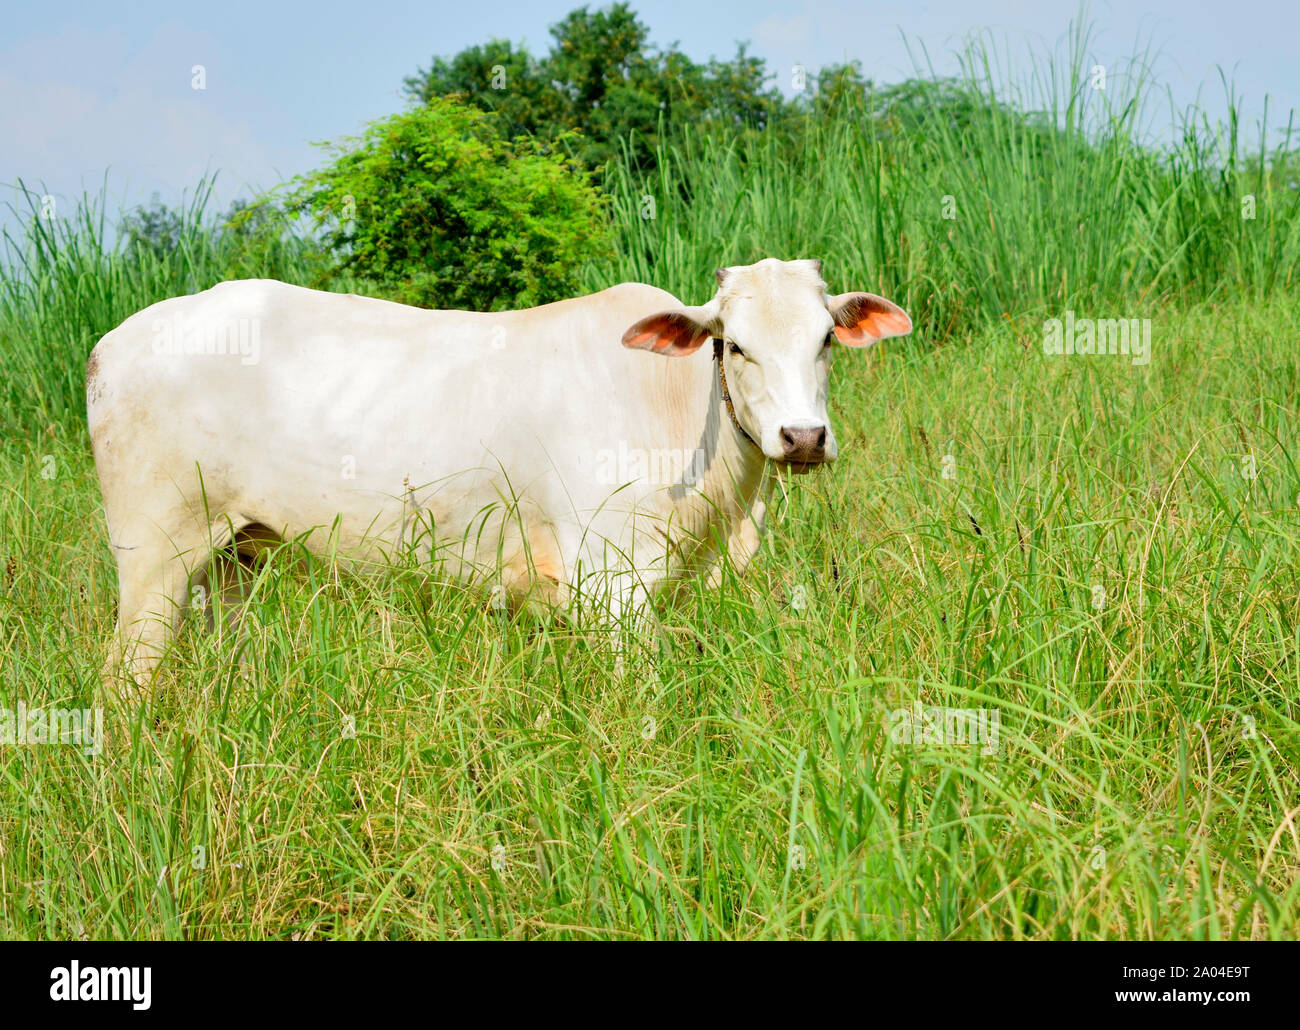 White India Cow Grazing In Field Stock Photo Alamy